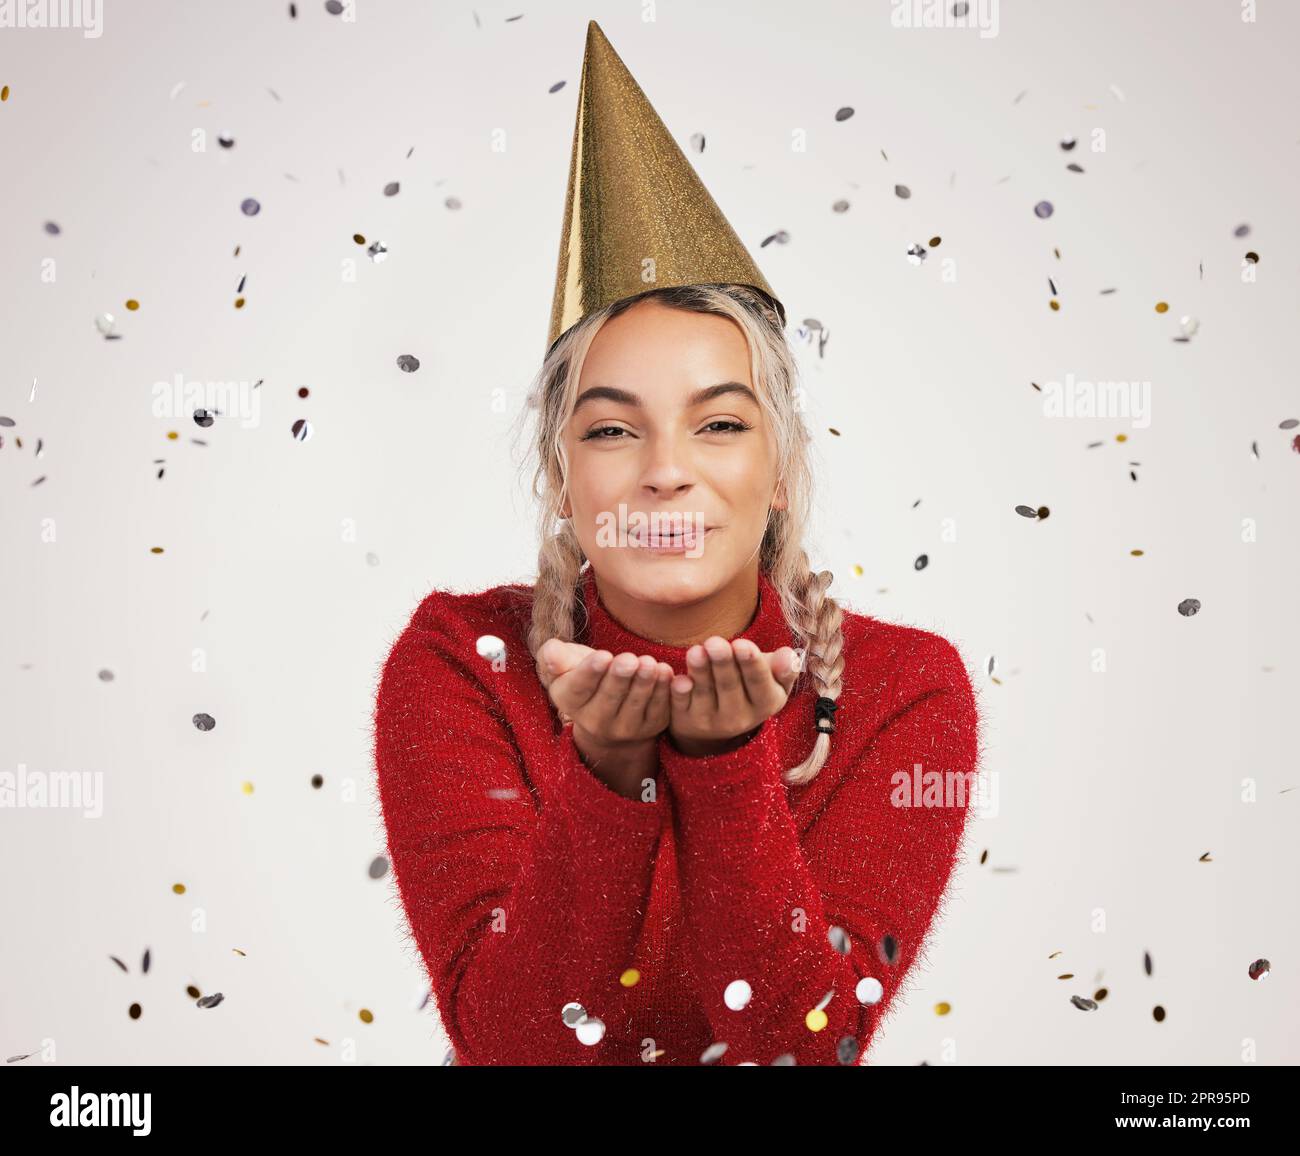 The world has grown weary through the years, but at Christmas it is young. Studio shot of a young woman wearing a party hat and blowing confetti against a grey background. Stock Photo